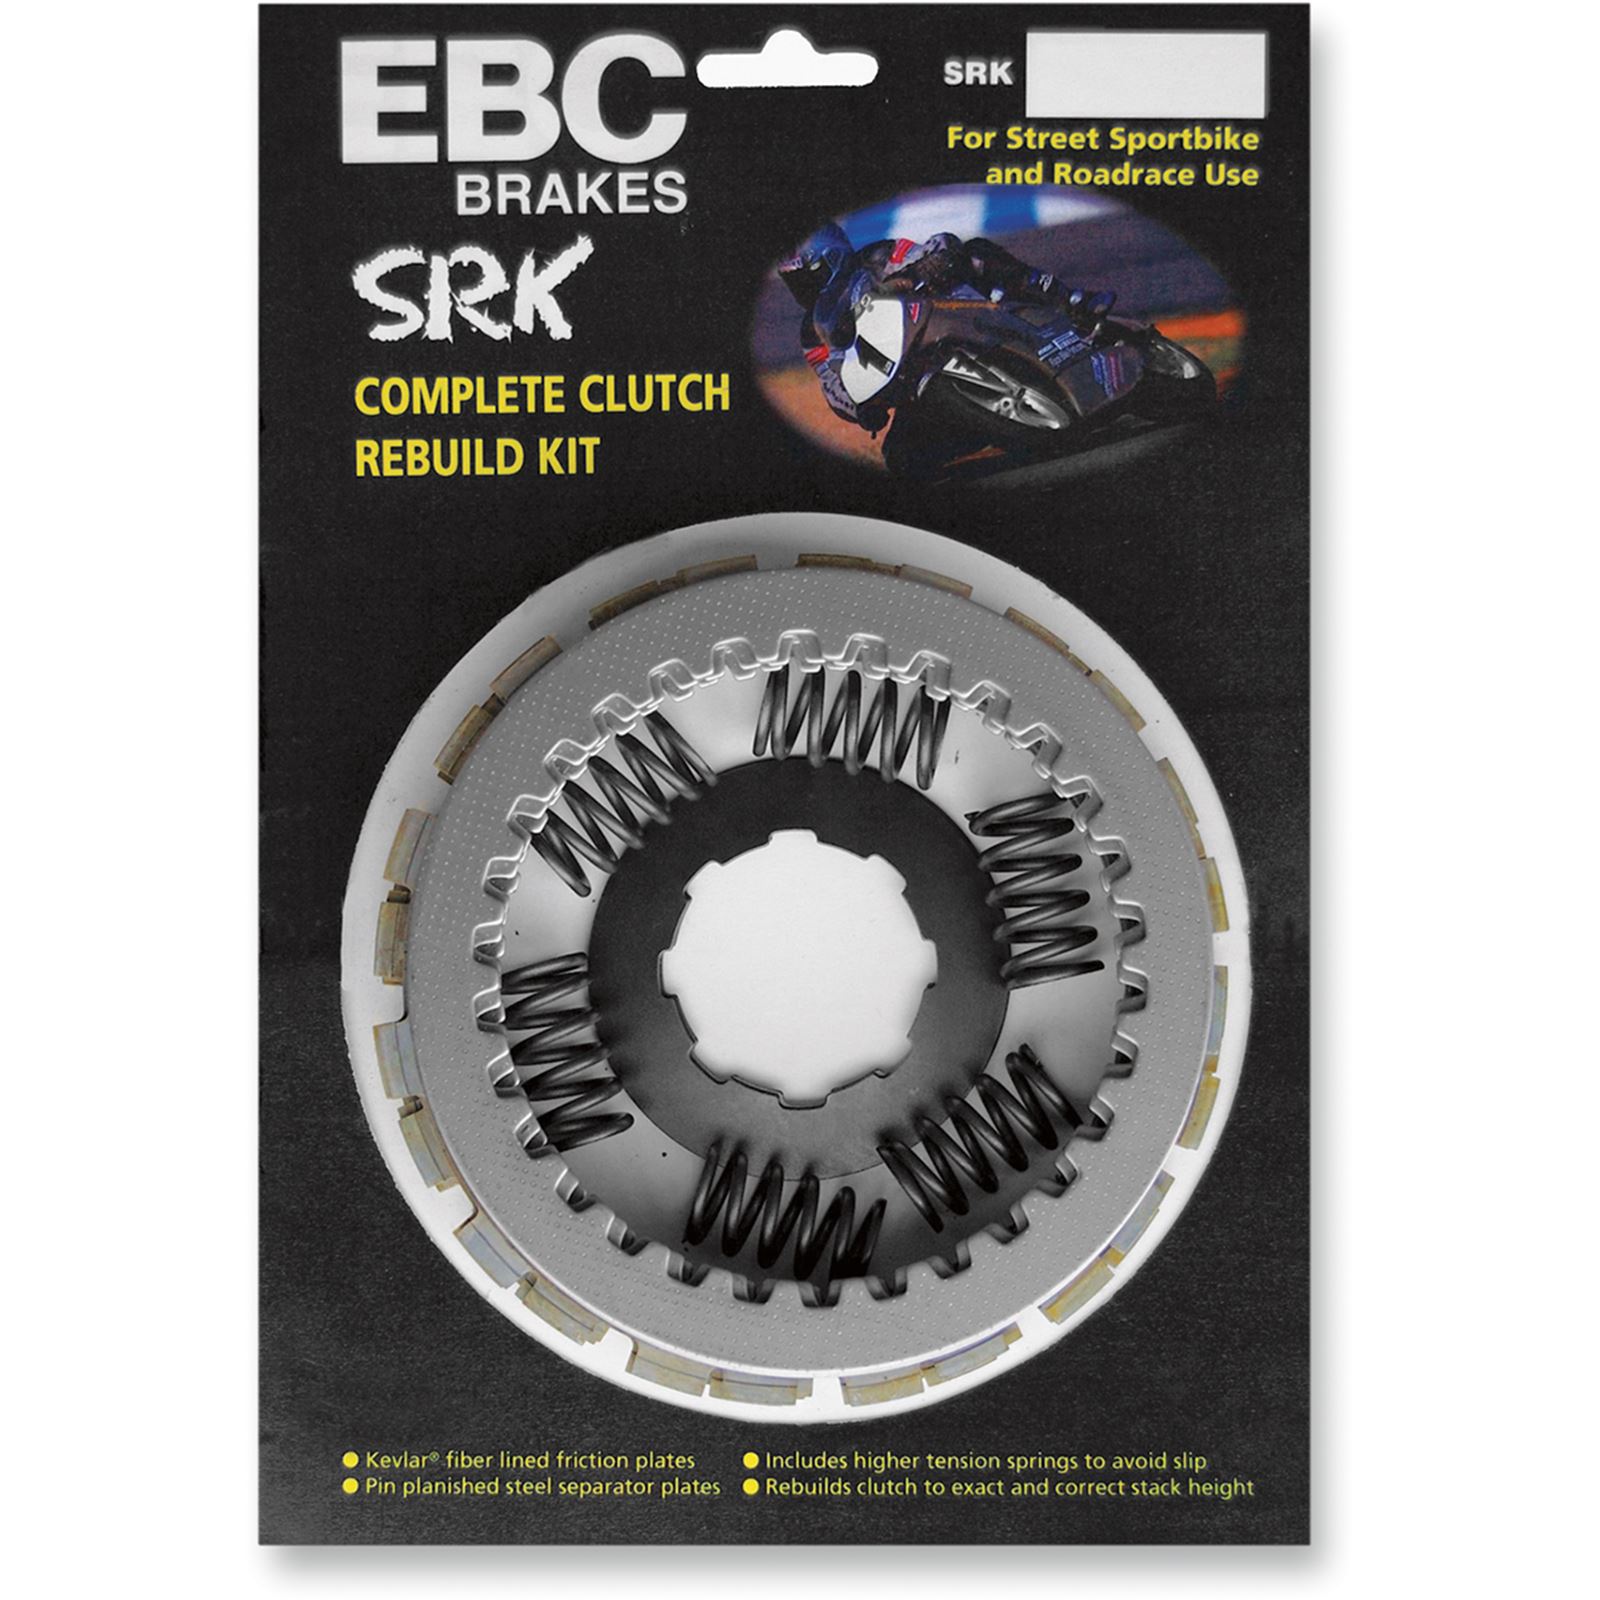 EBC Clutch Kit is at Motomentum at a great price! See our Free Shipping